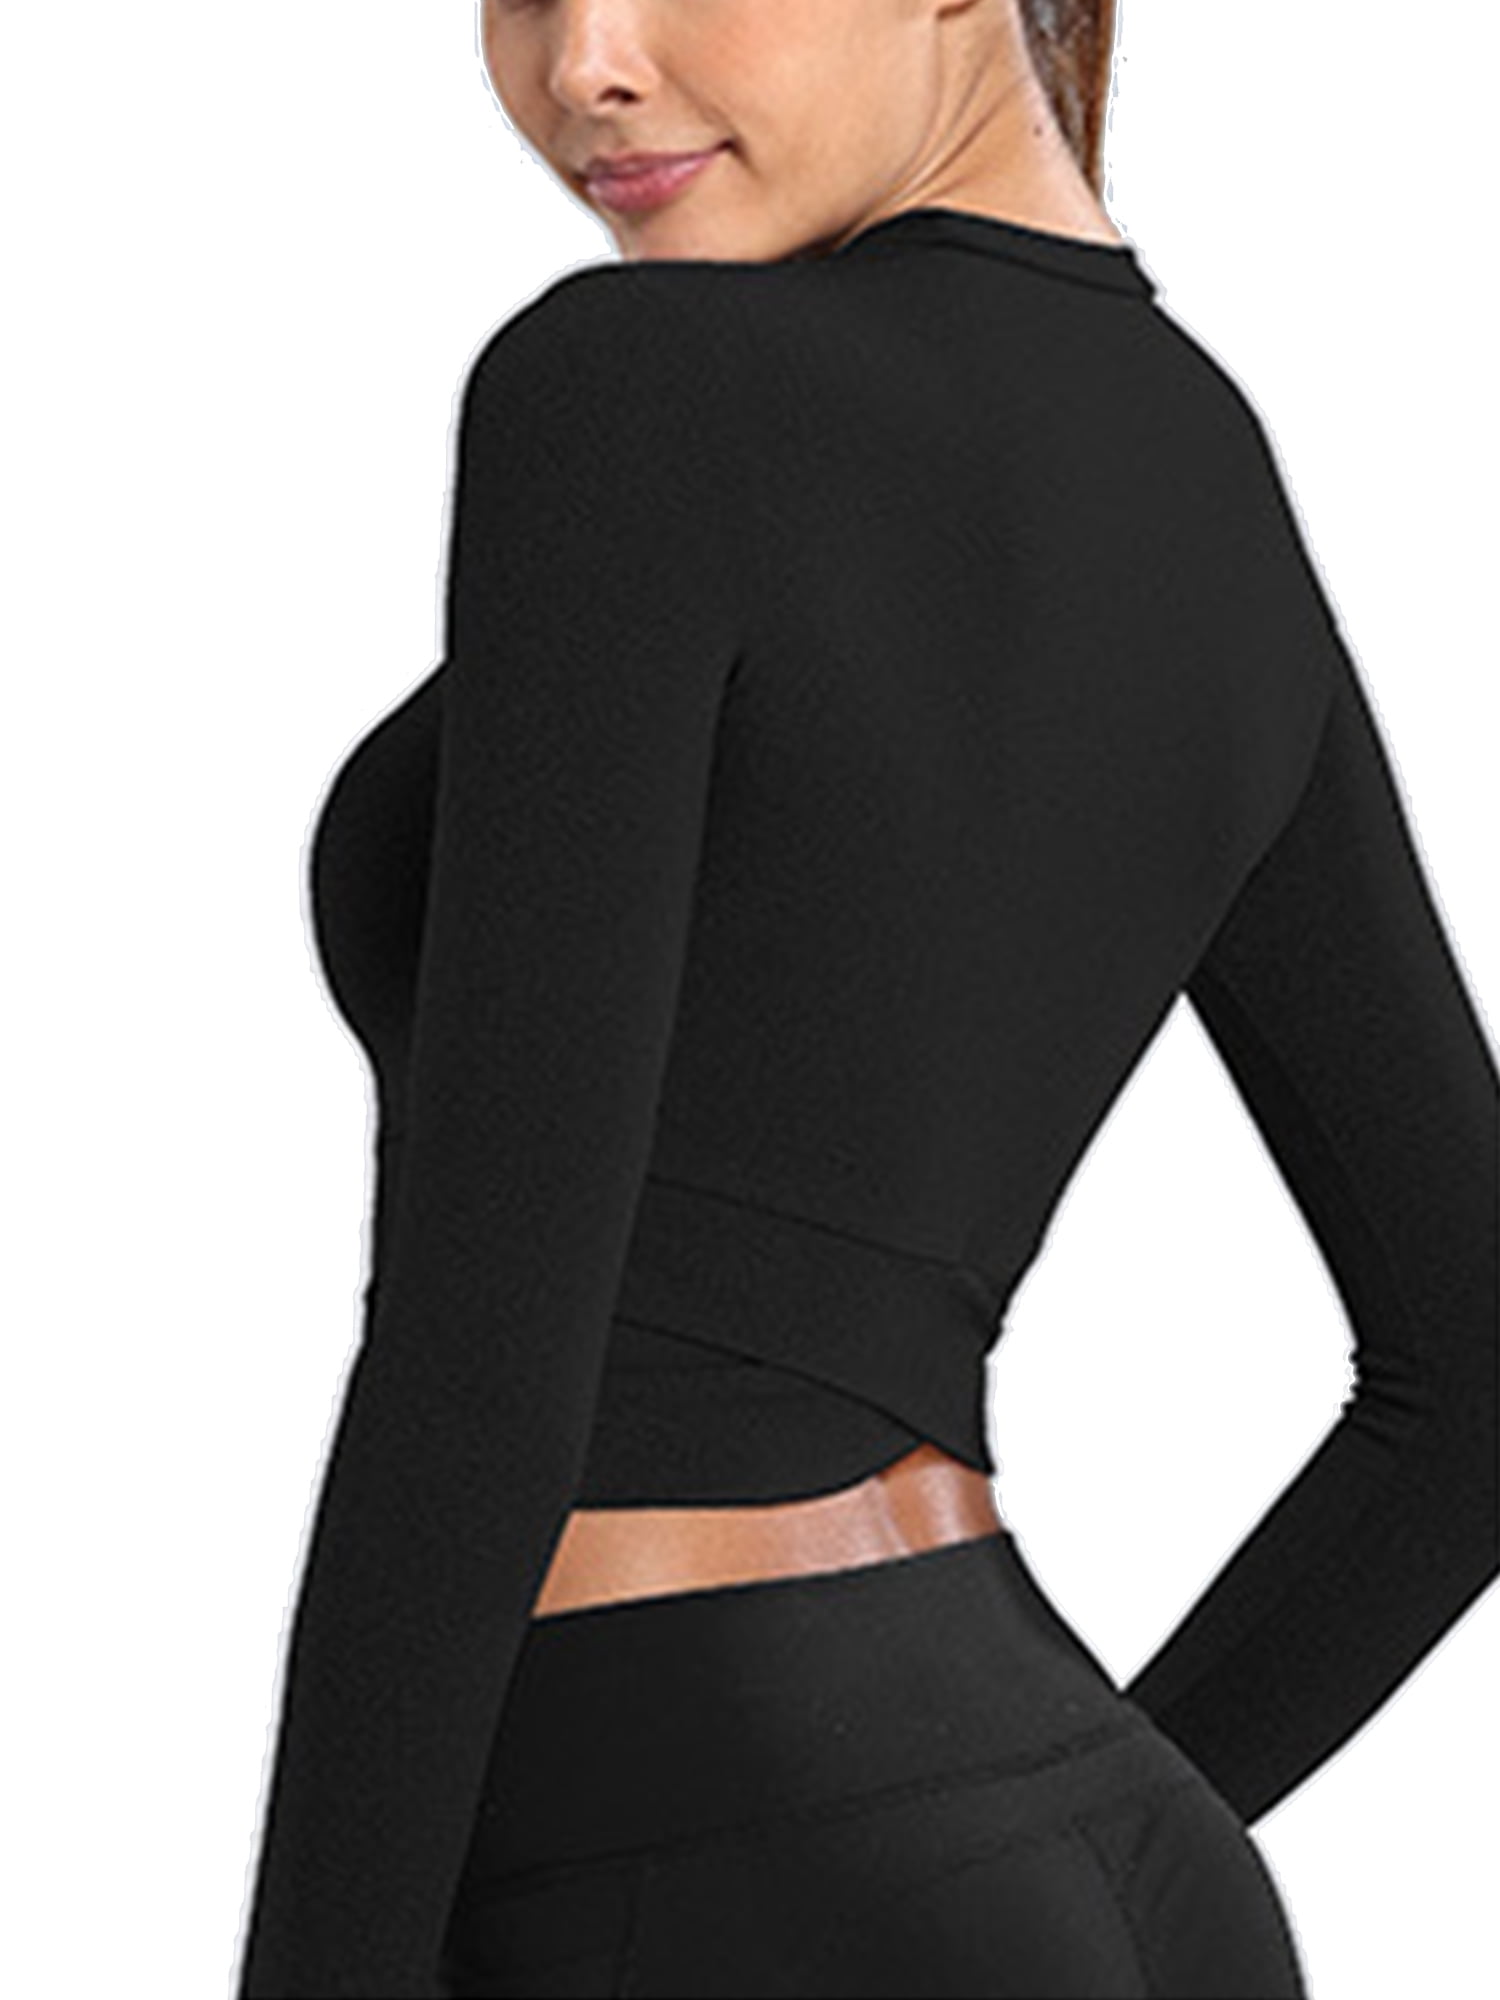 Capreze Workout Yoga Tops for Women Crop Top Compression Long Sleeve  Fitness Athletic Yoga Sports Shirt 